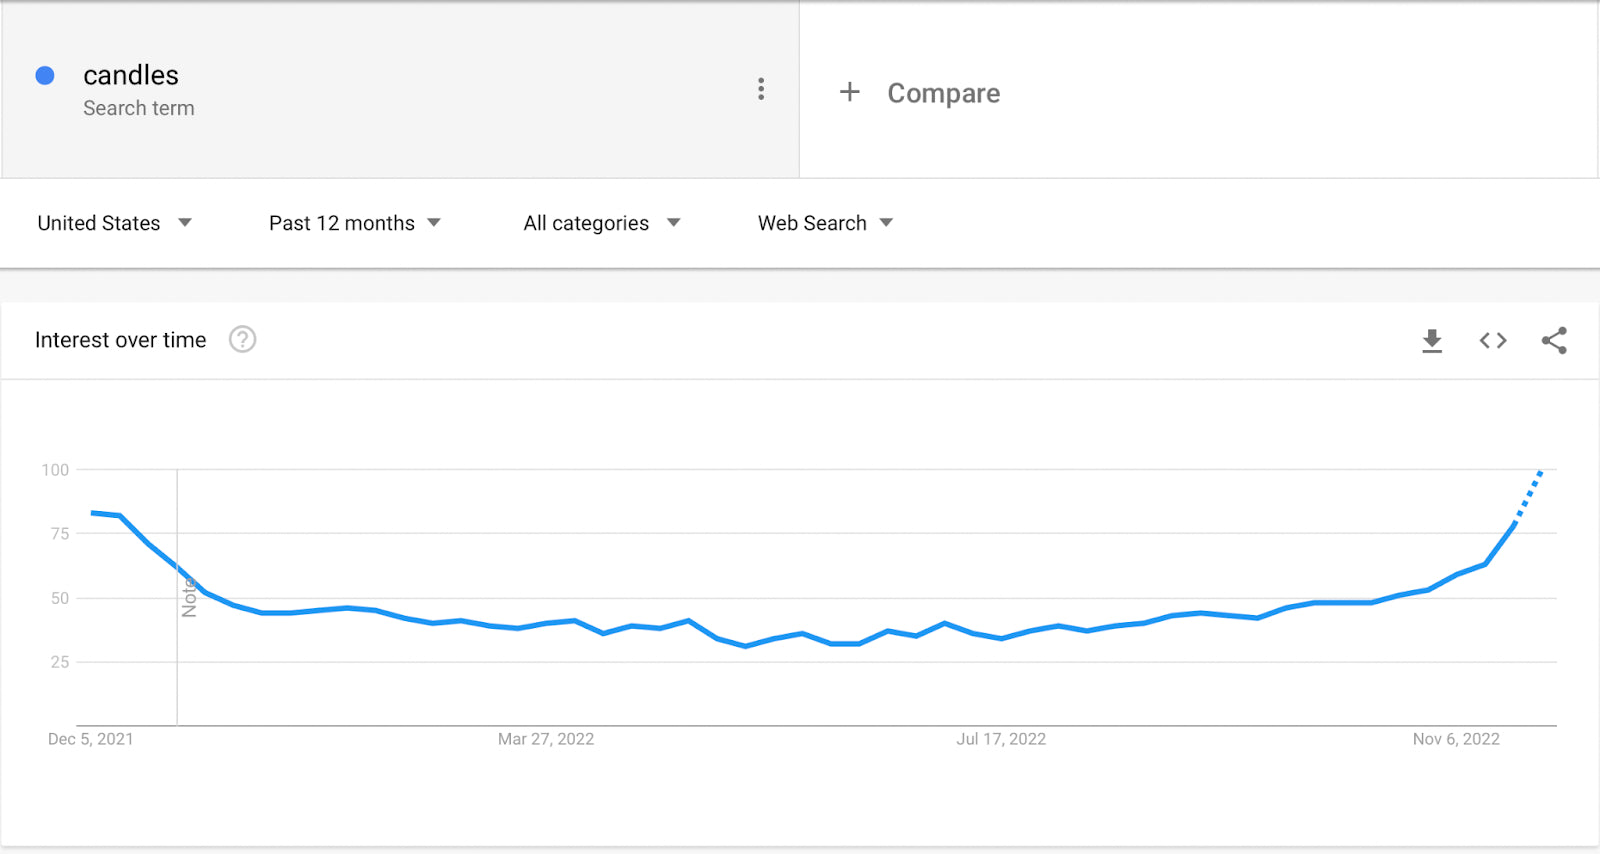 Stable search volume of candles throughout the year